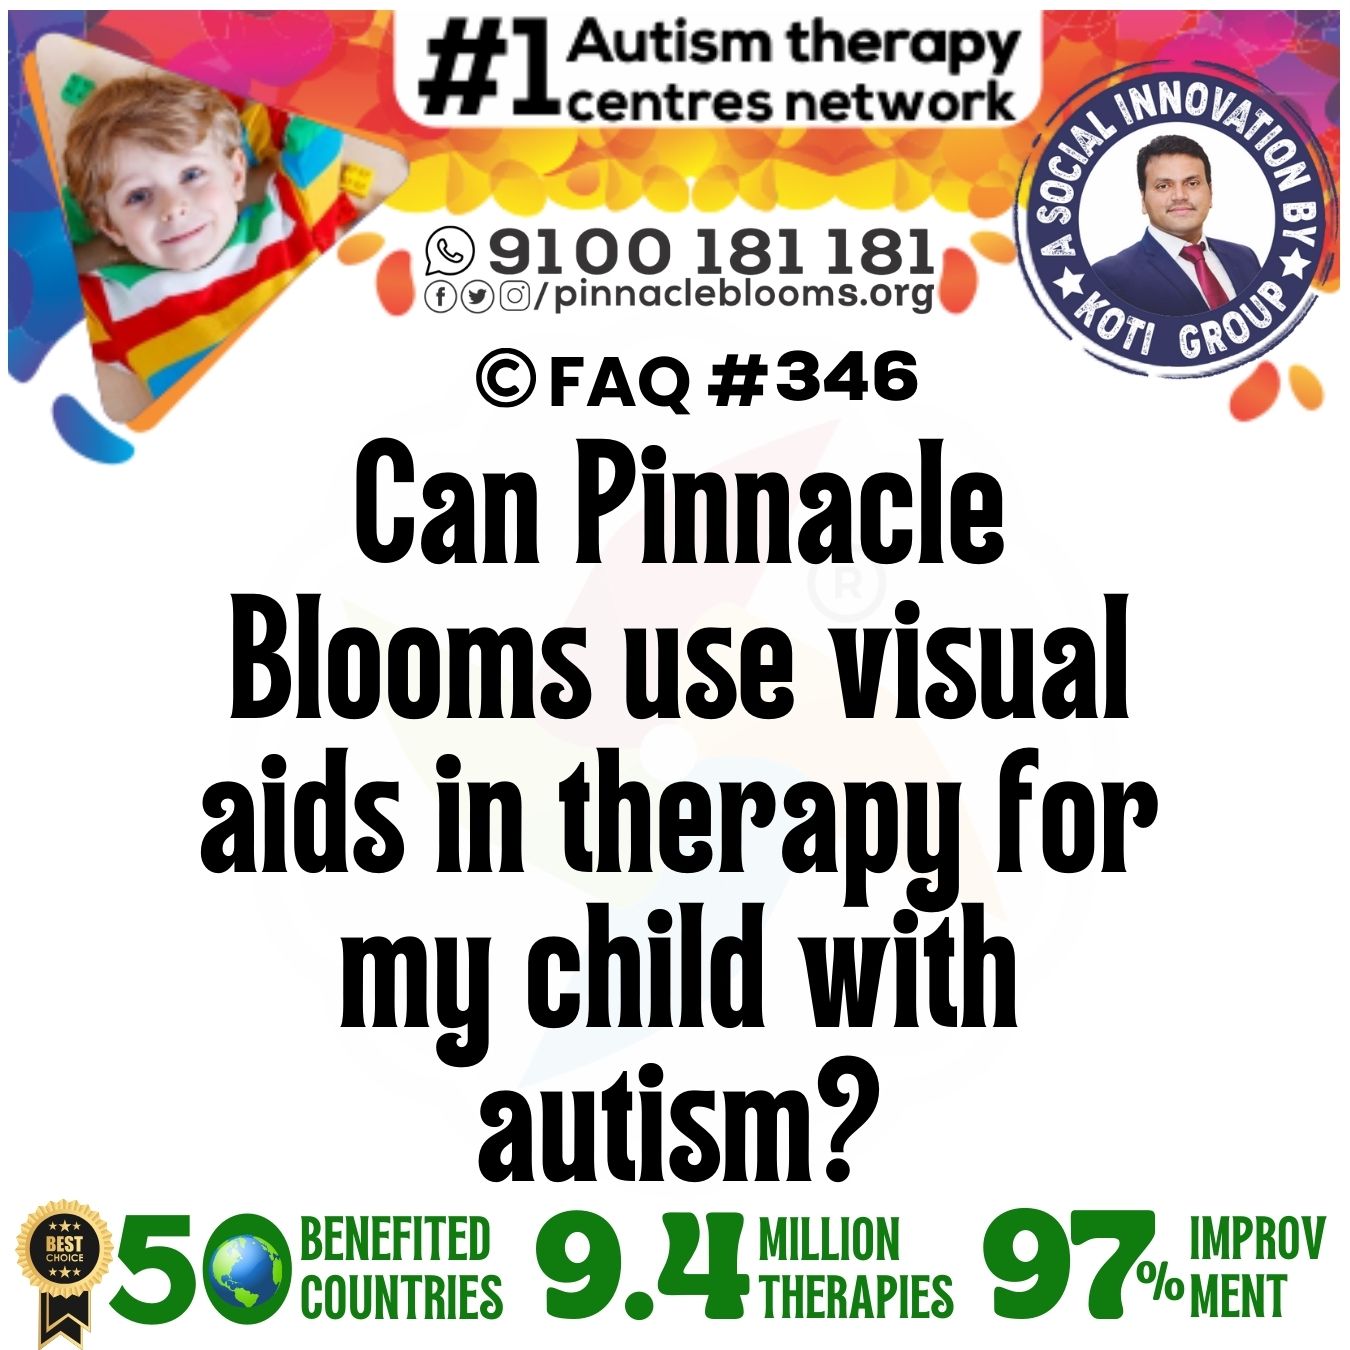 Can Pinnacle Blooms use visual aids in therapy for my child with autism?